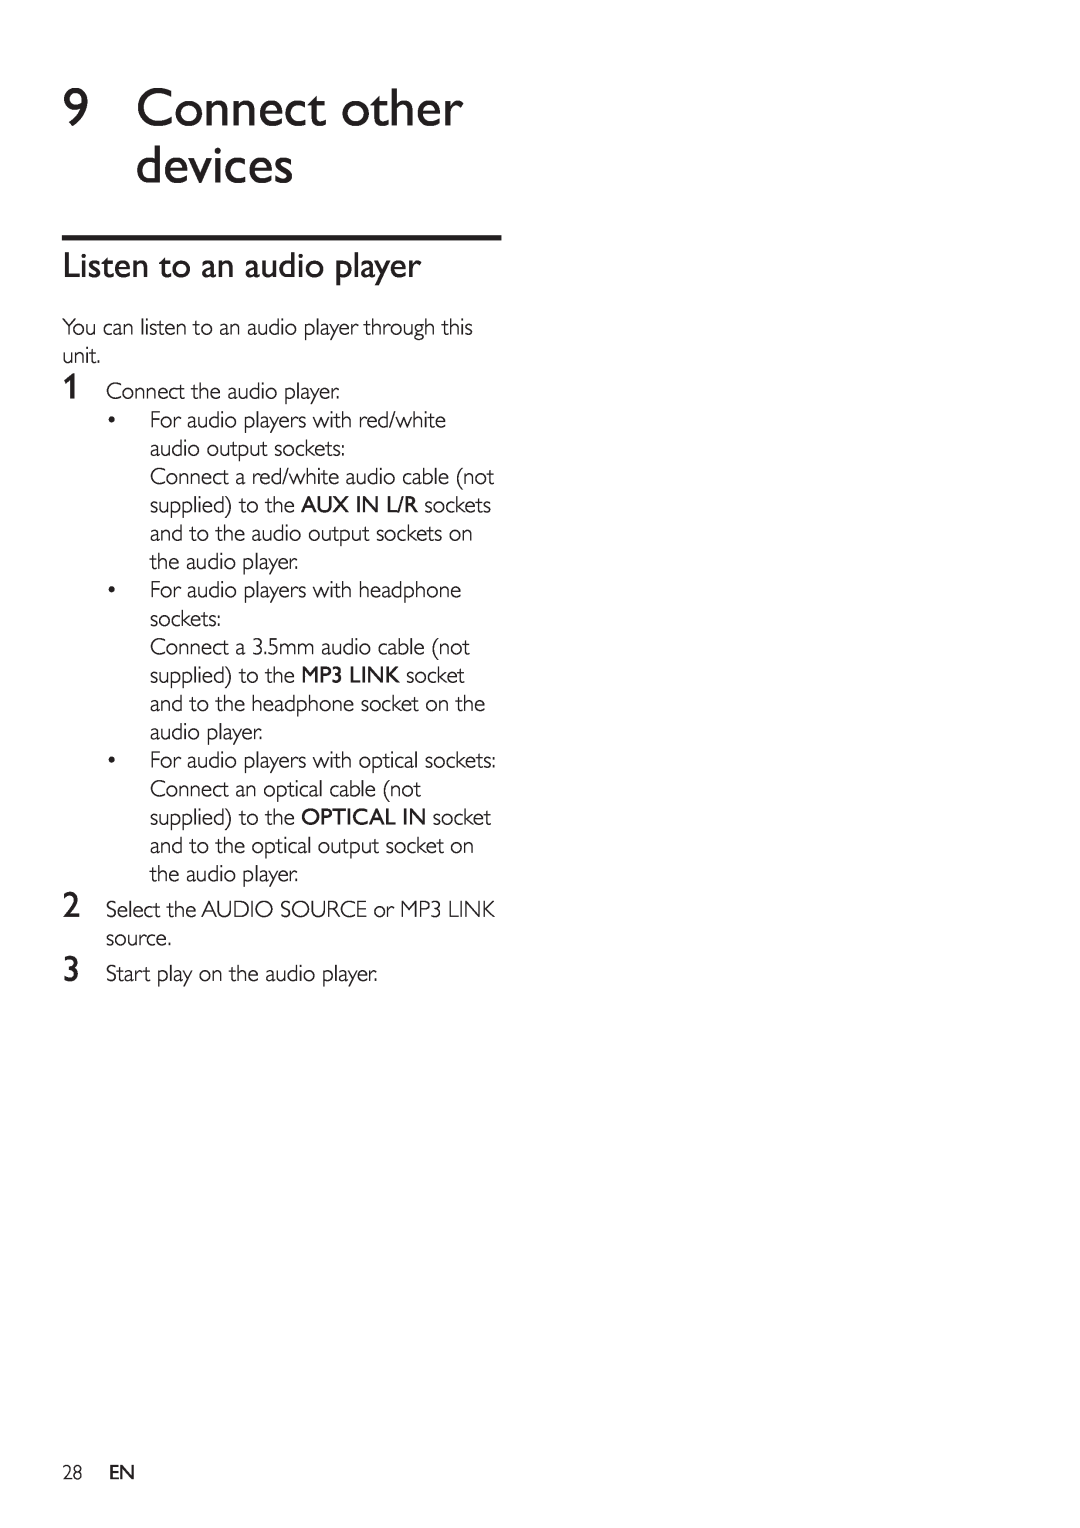 Philips HSB2351/51 user manual 9Connect other devices, Listen to an audio player 